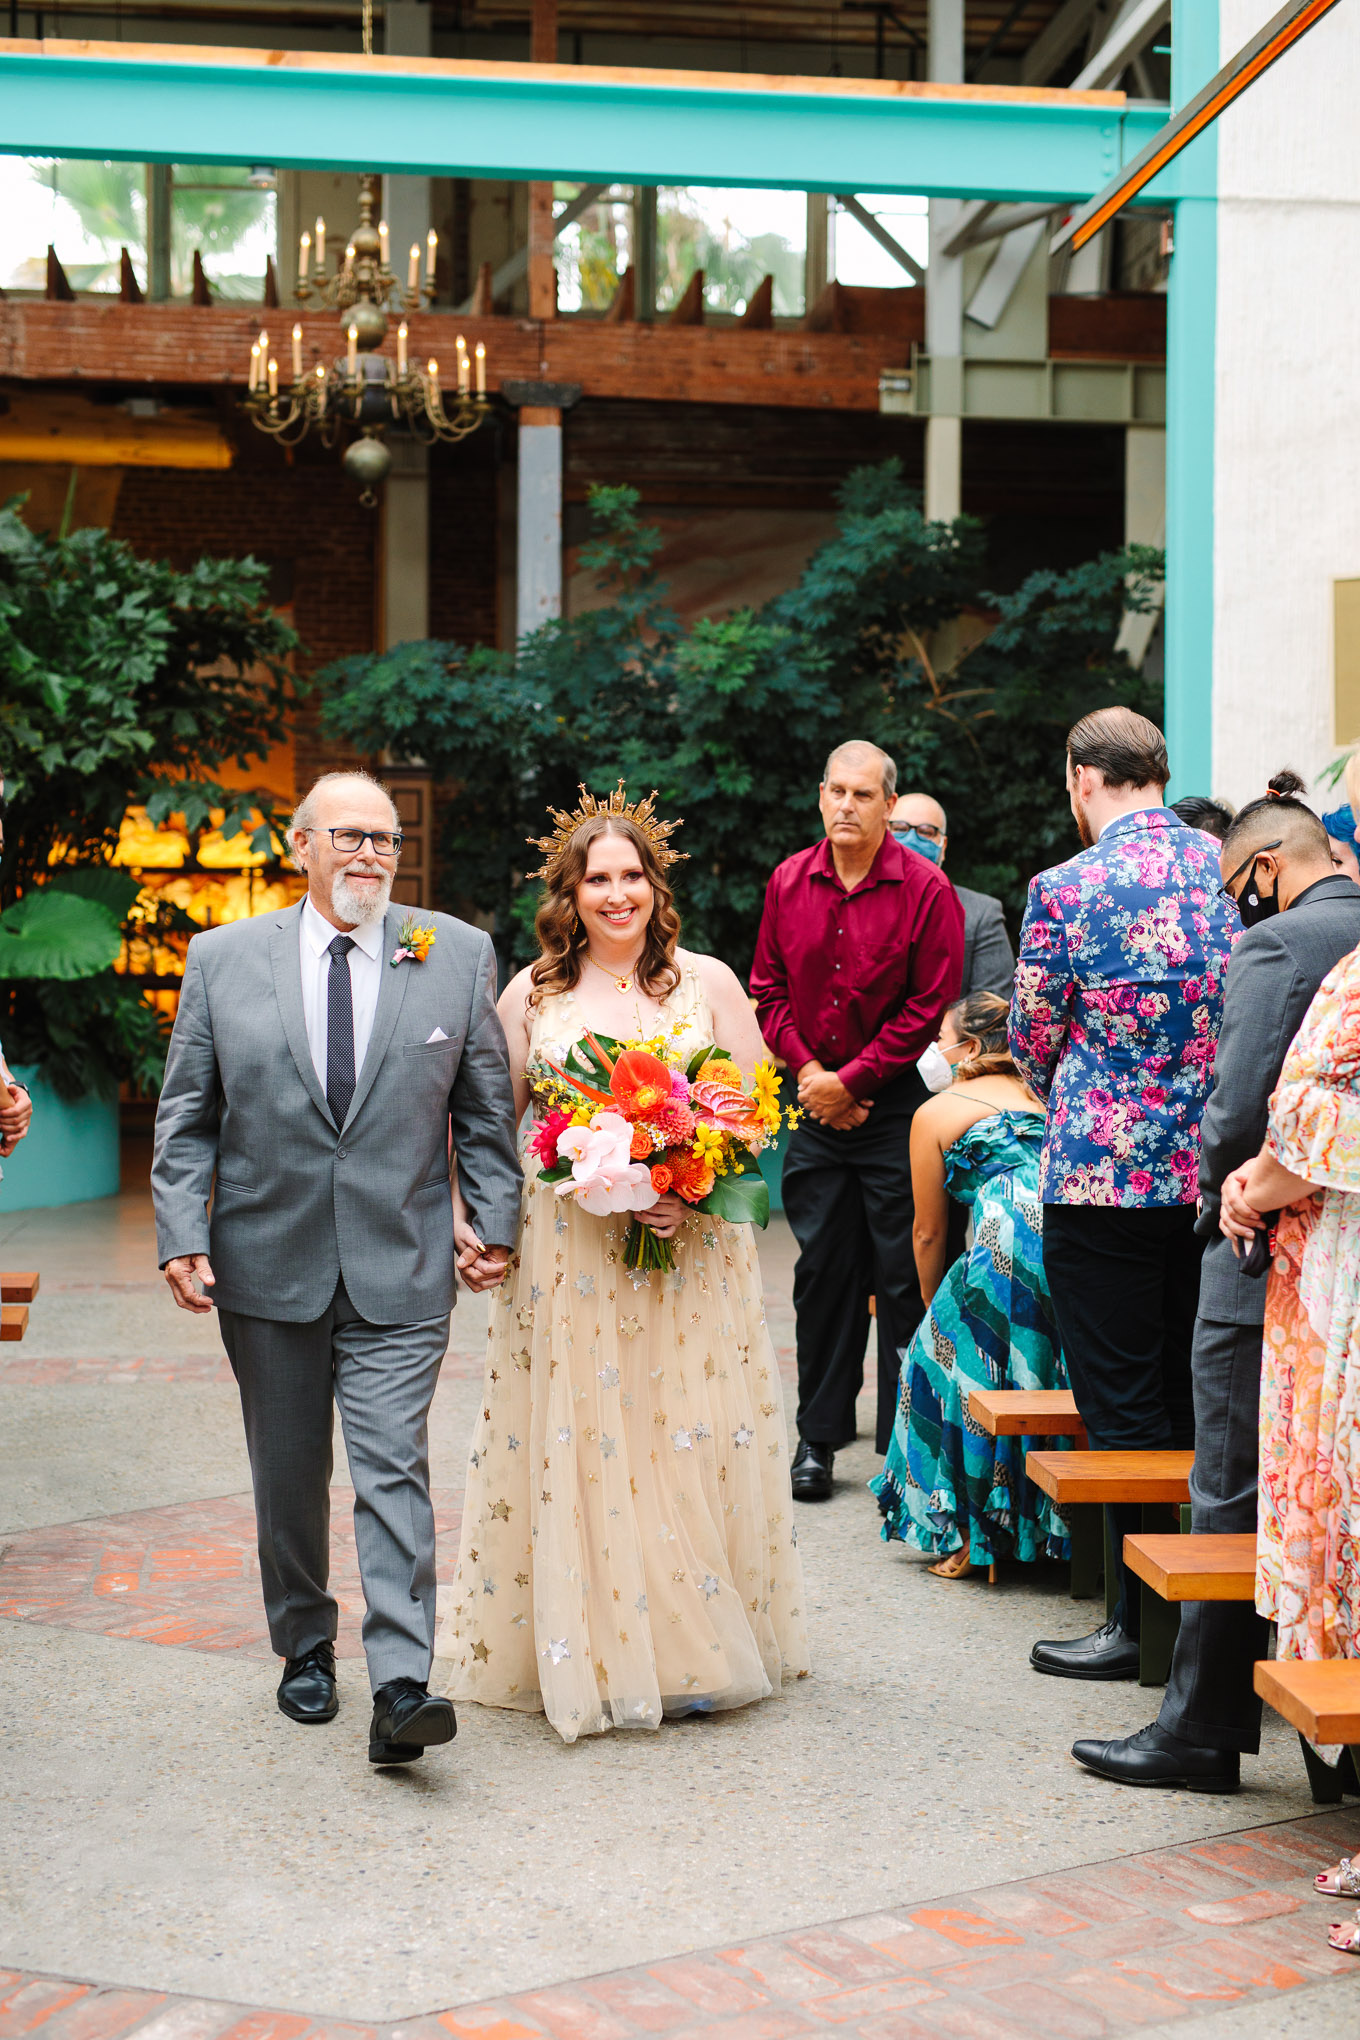 Bride walking down the aisle with father | Colorful Downtown Los Angeles Valentine Wedding | Los Angeles wedding photographer | #losangeleswedding #colorfulwedding #DTLA #valentinedtla   Source: Mary Costa Photography | Los Angeles